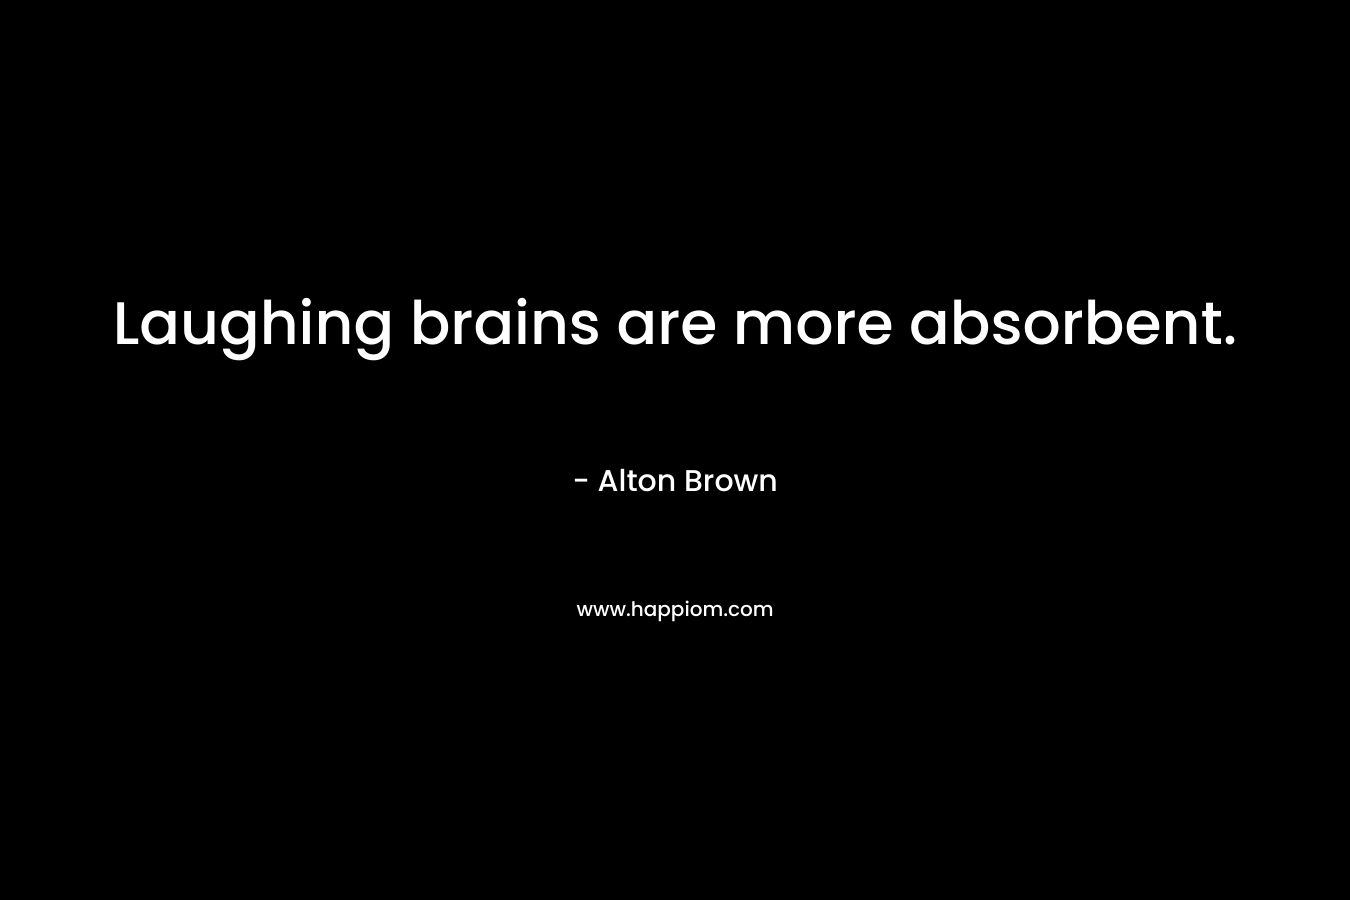 Laughing brains are more absorbent.